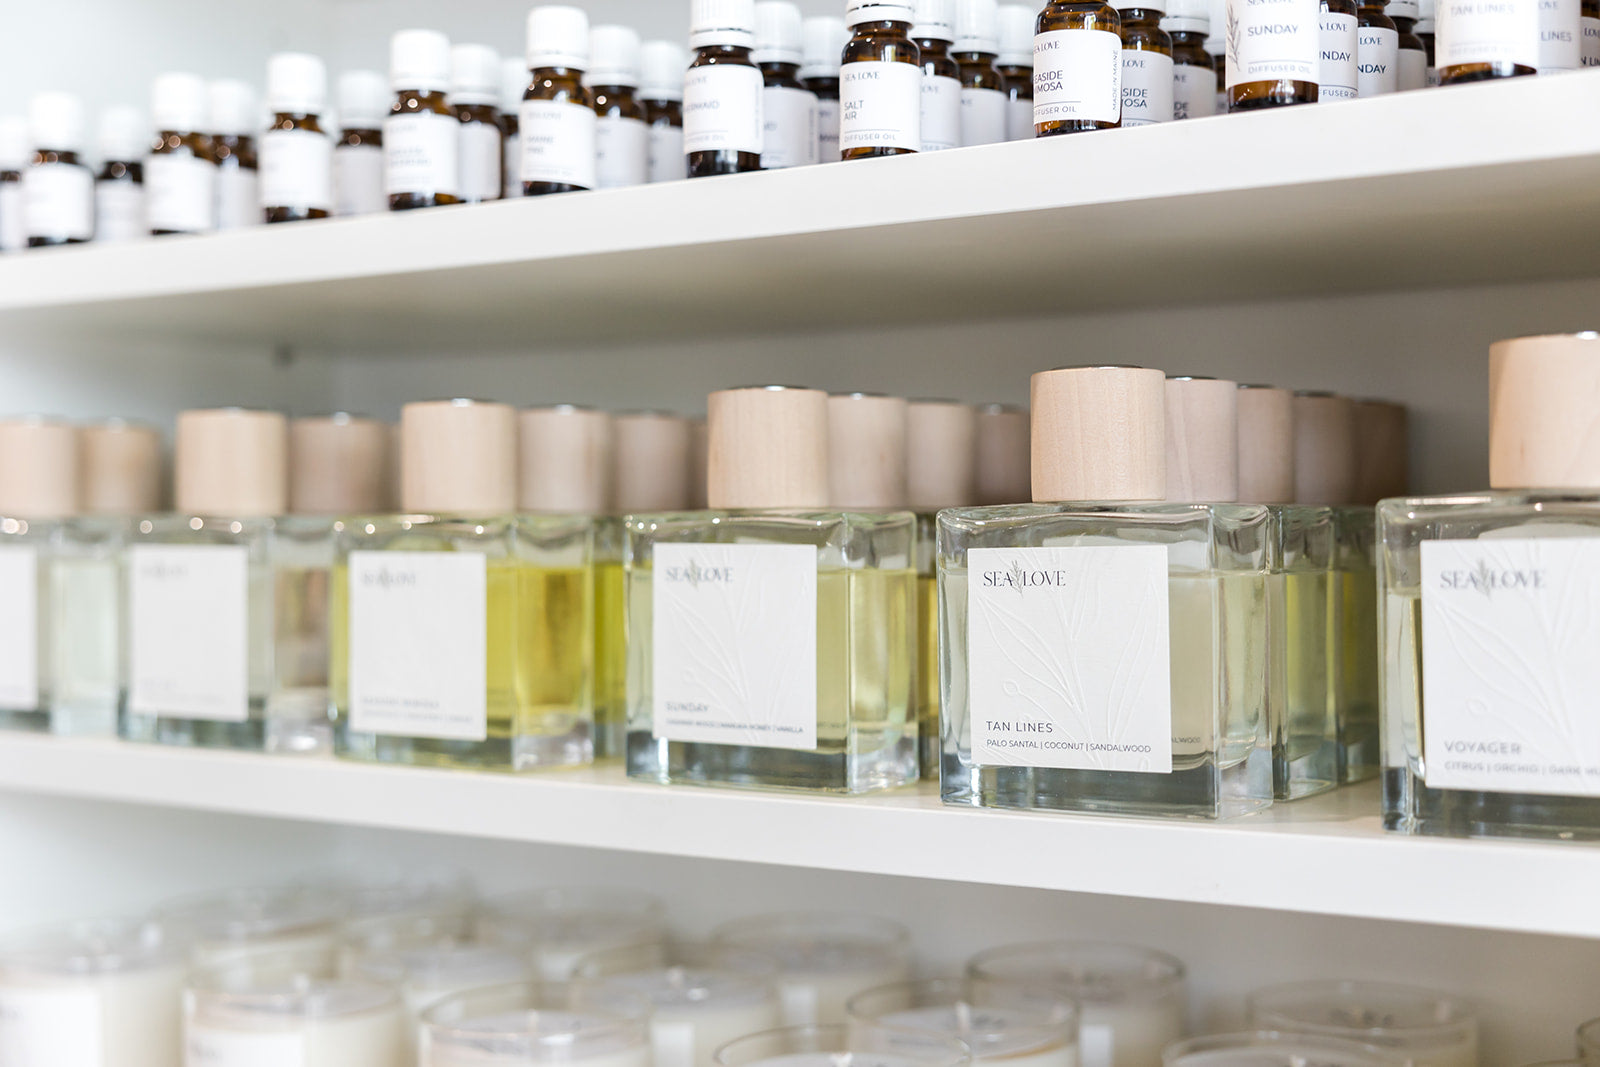 Elegant boutique shelf displaying a neat arrangement of luxury scented products, including candles and fragrances, with a minimalist aesthetic.